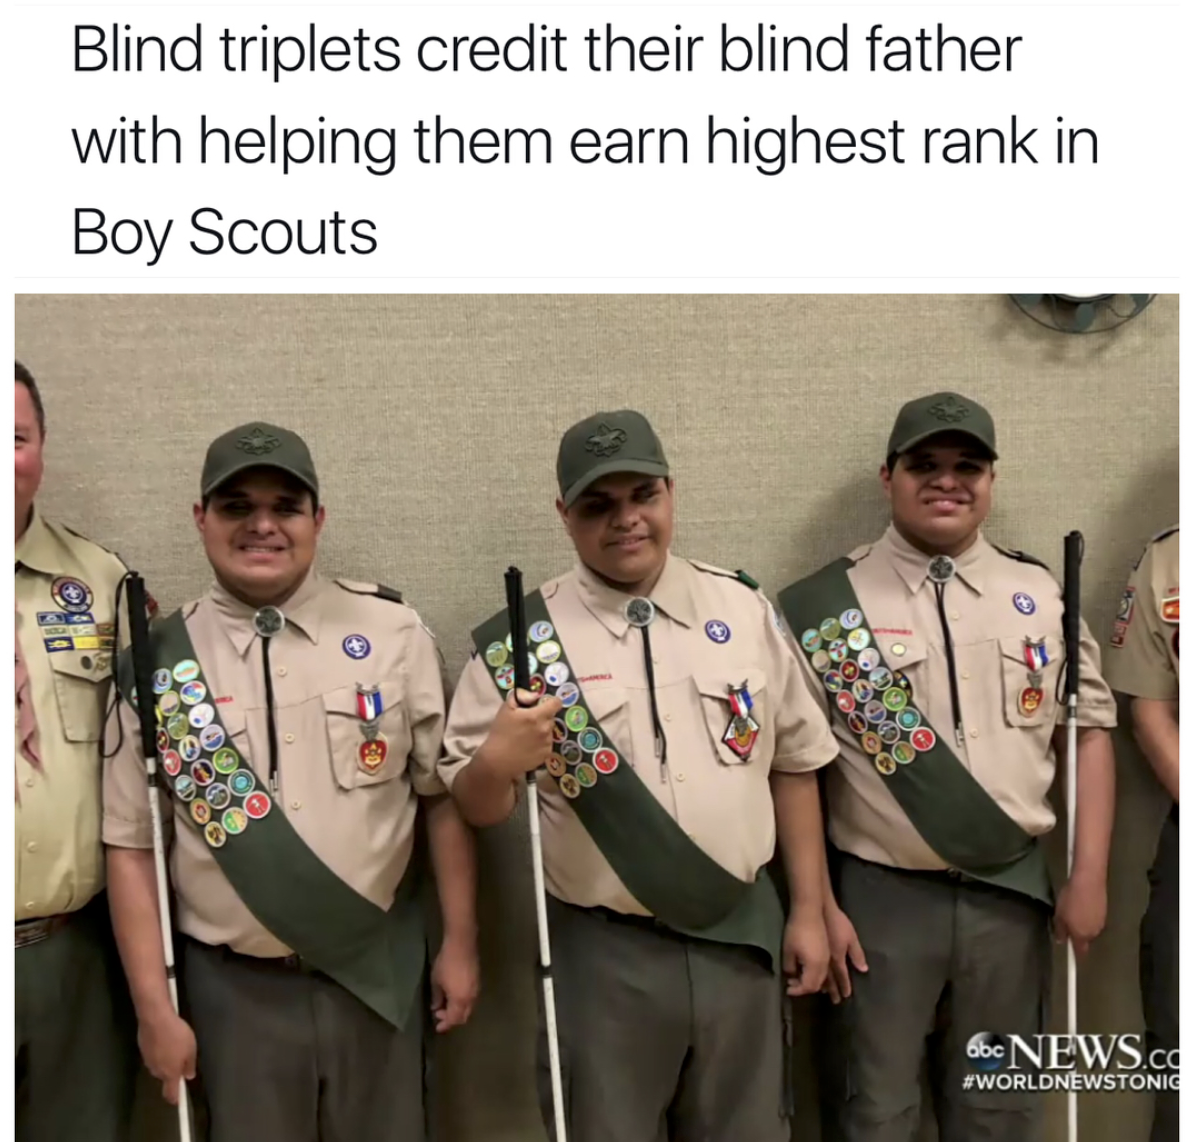 military - Blind triplets credit their blind father with helping them earn highest rank in Boy Scouts 6 News.cd Sworldnewstonic